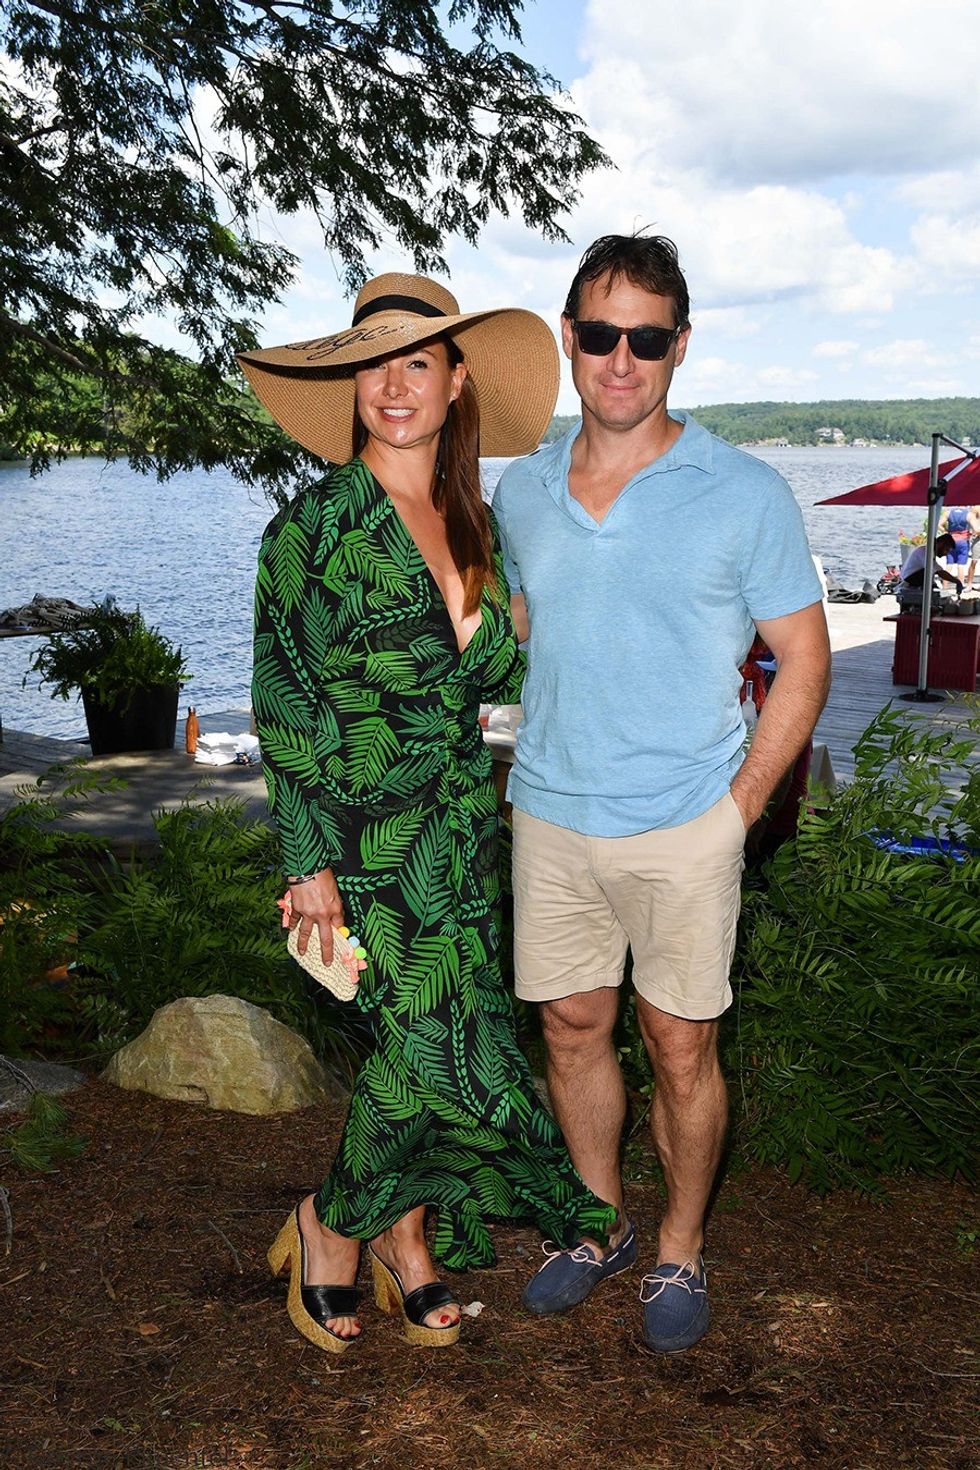 Cottage owners and dock party hosts, Tamara Bahry and Rob White. (Photo by George Pimentel for Commission Yourself)